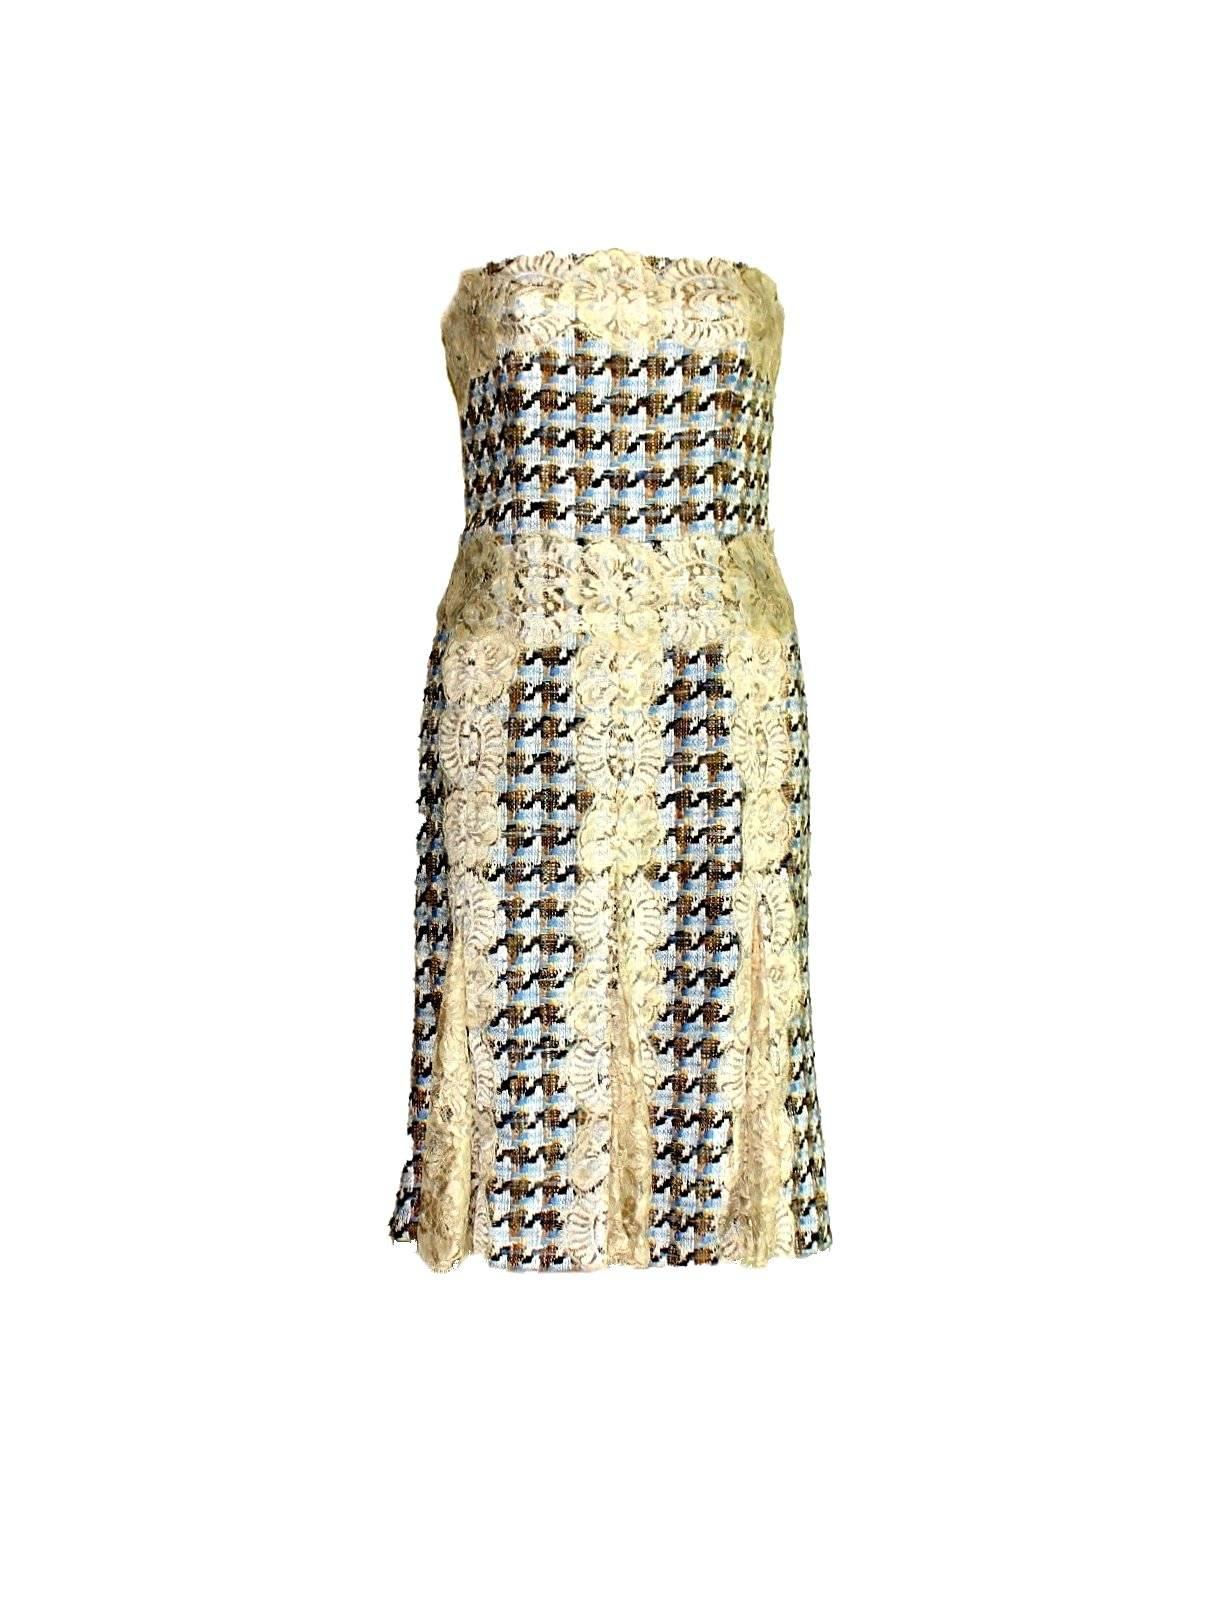     A DOLCE & GABBANA classic signature piece that will last you for years
    Consisting of a dress with matching jacket
    Both pieces made of amazing tweed fabric with cream lace trip
    Scalloped edges
    The dress has a beautifully